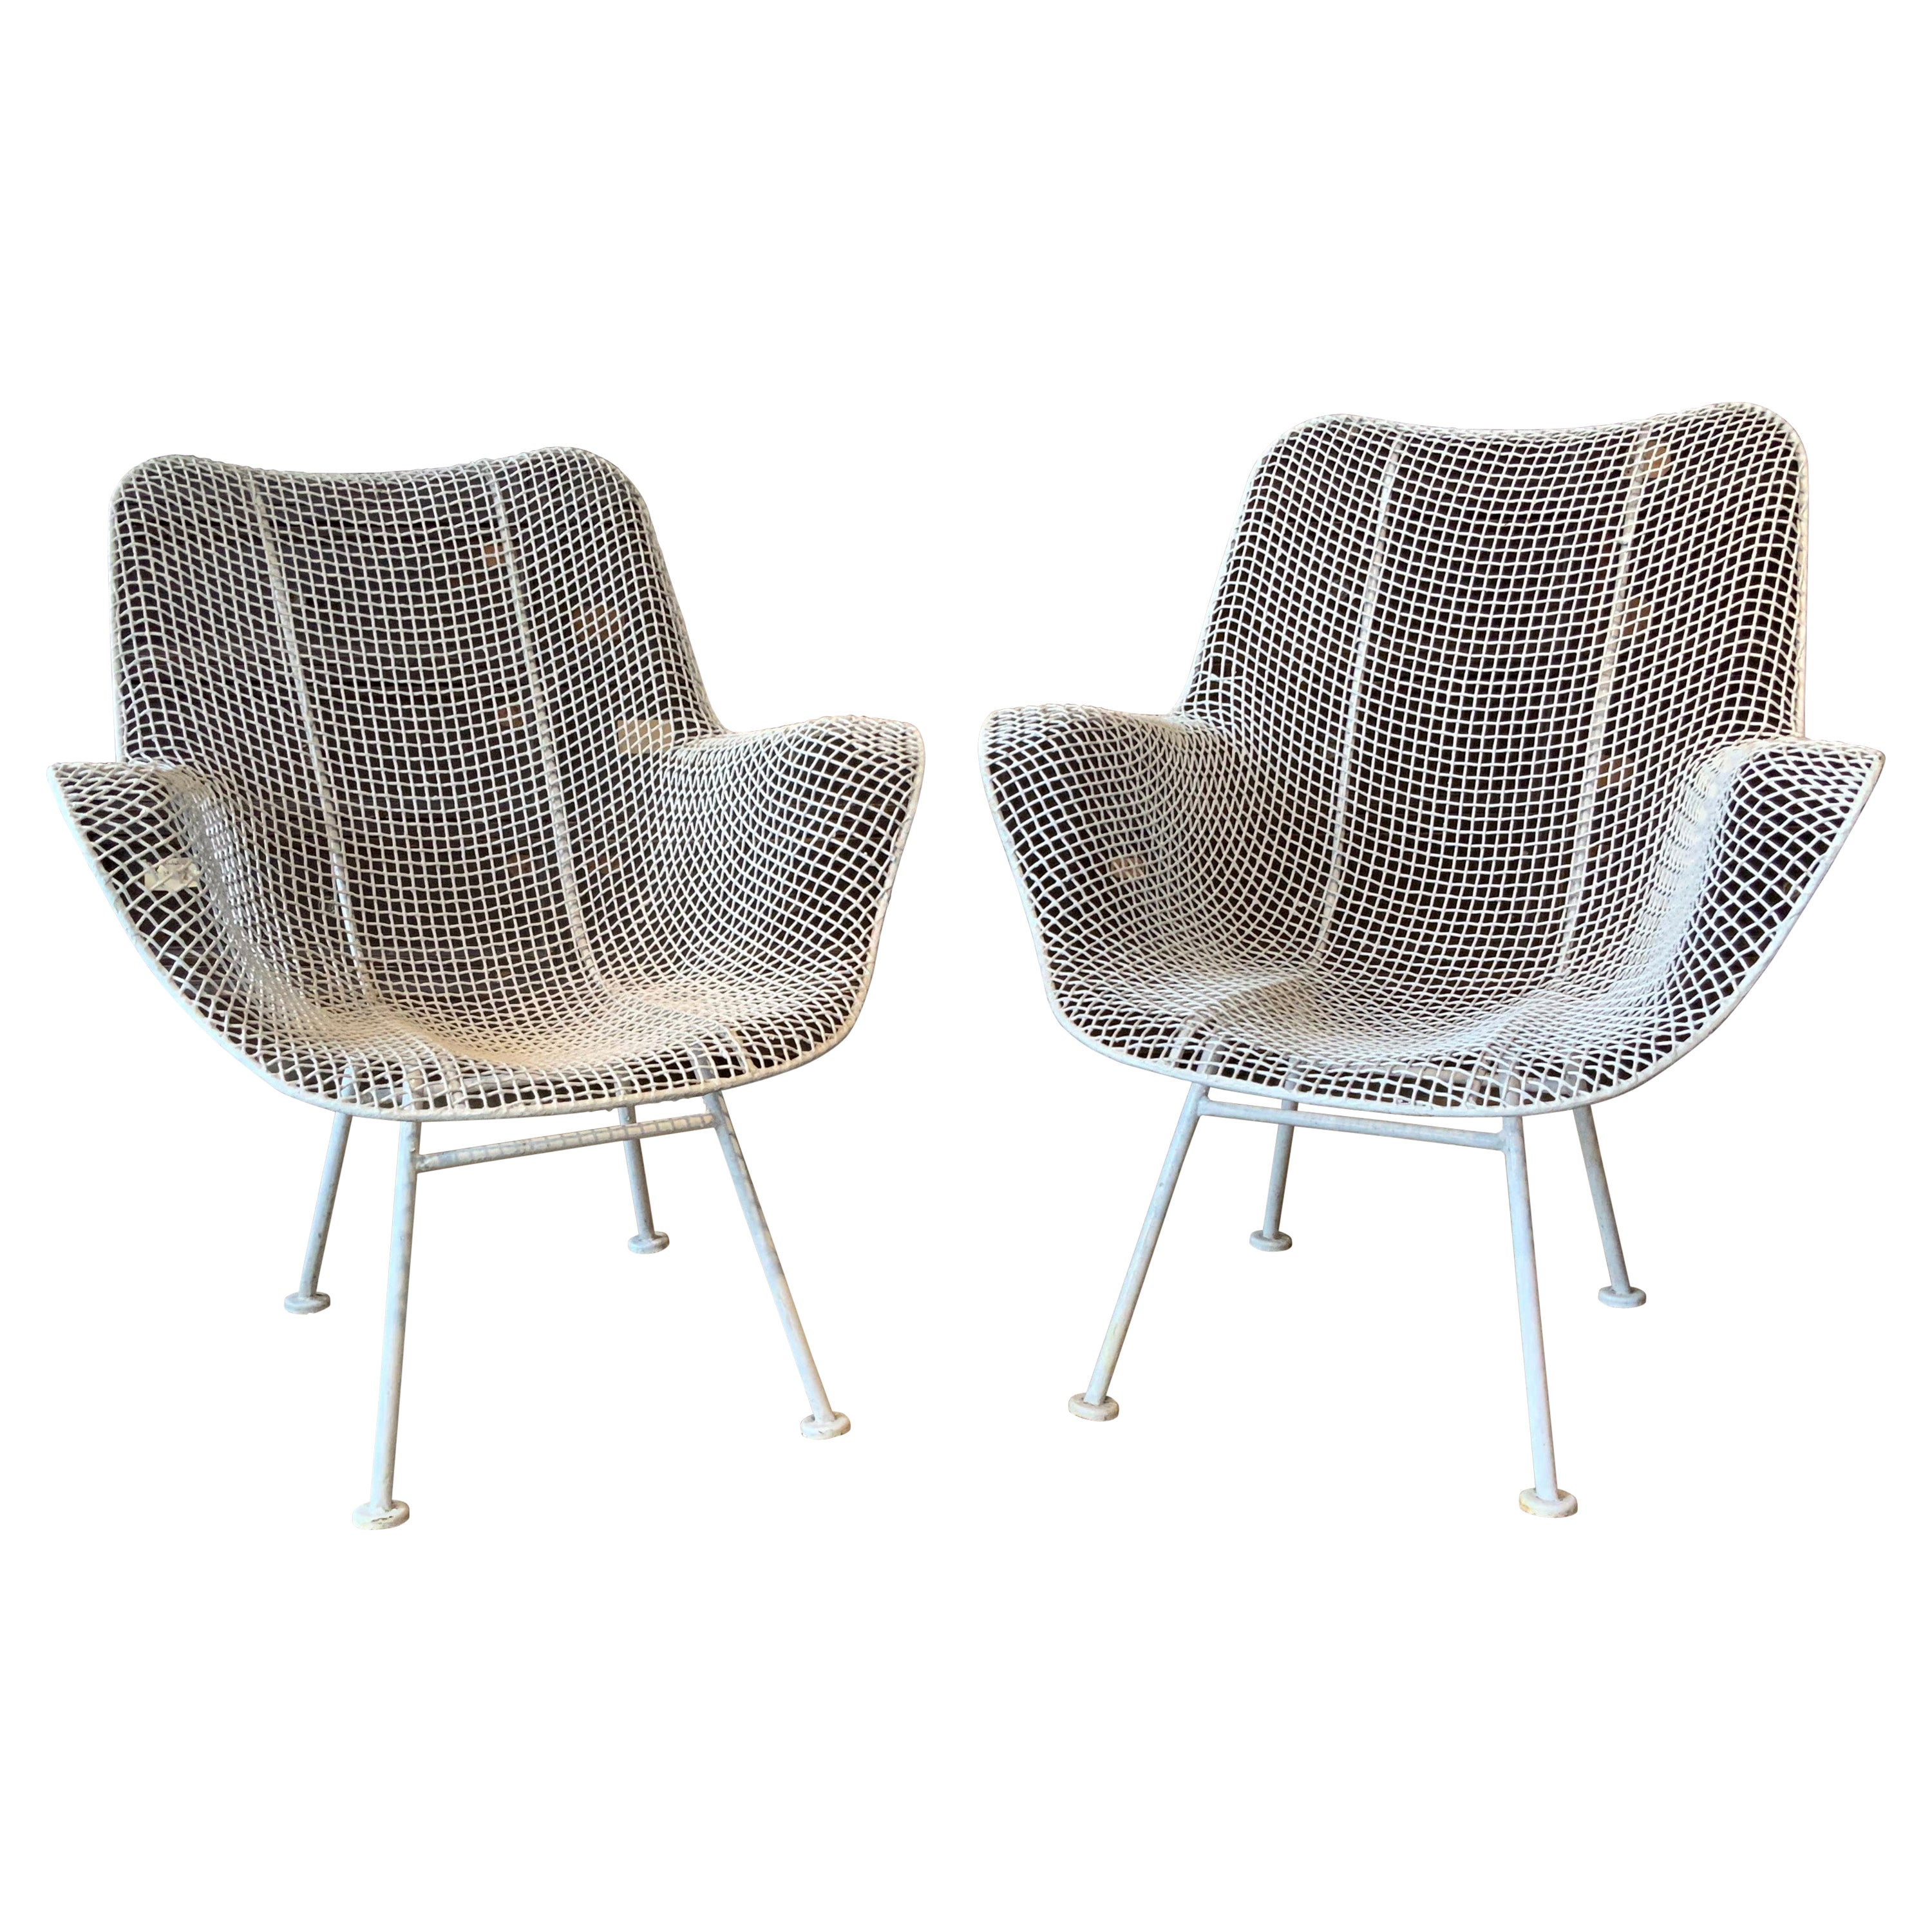 Pair of Midcentury 1950s Sculptura Lounge Chairs by Russell Woodard For Sale